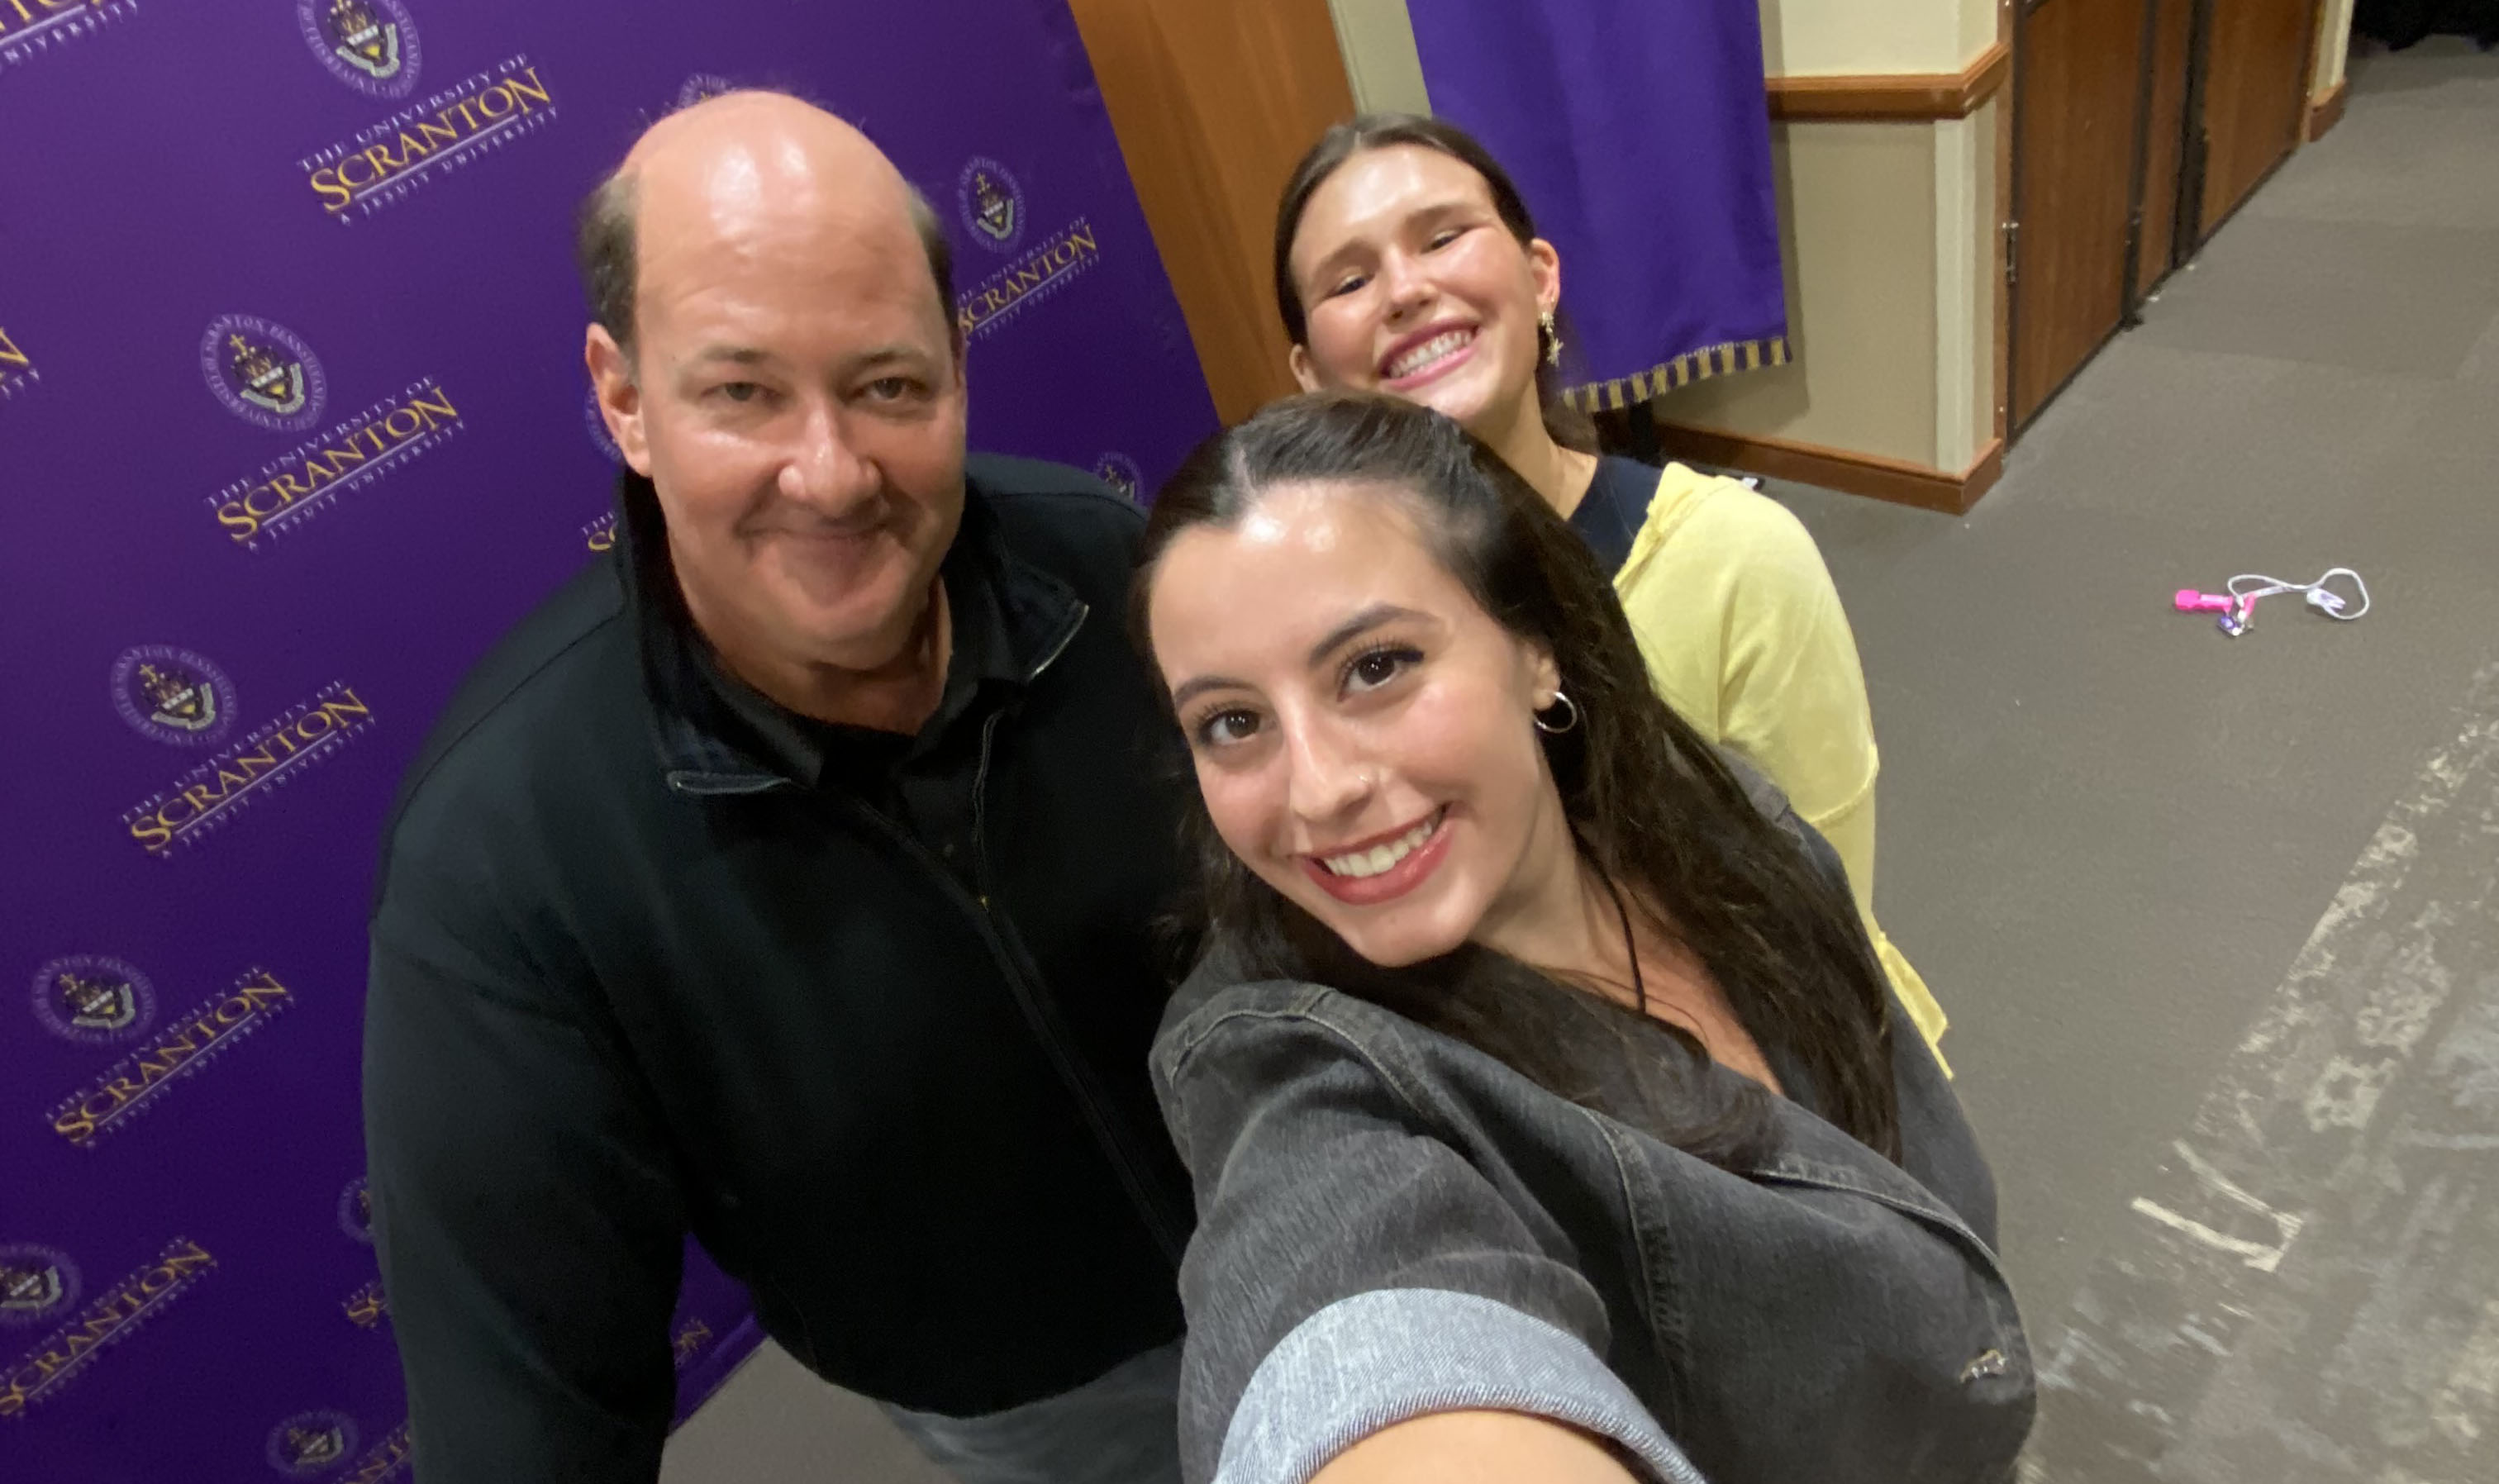 Francesca Ragusa, '24 and Claire Sunday, '23, were among the 225 University of Scranton fans of "The Office" who attended the Sept.15 exclusive Q and A session on campus with actor and best-seling author Brian Baumgartner.